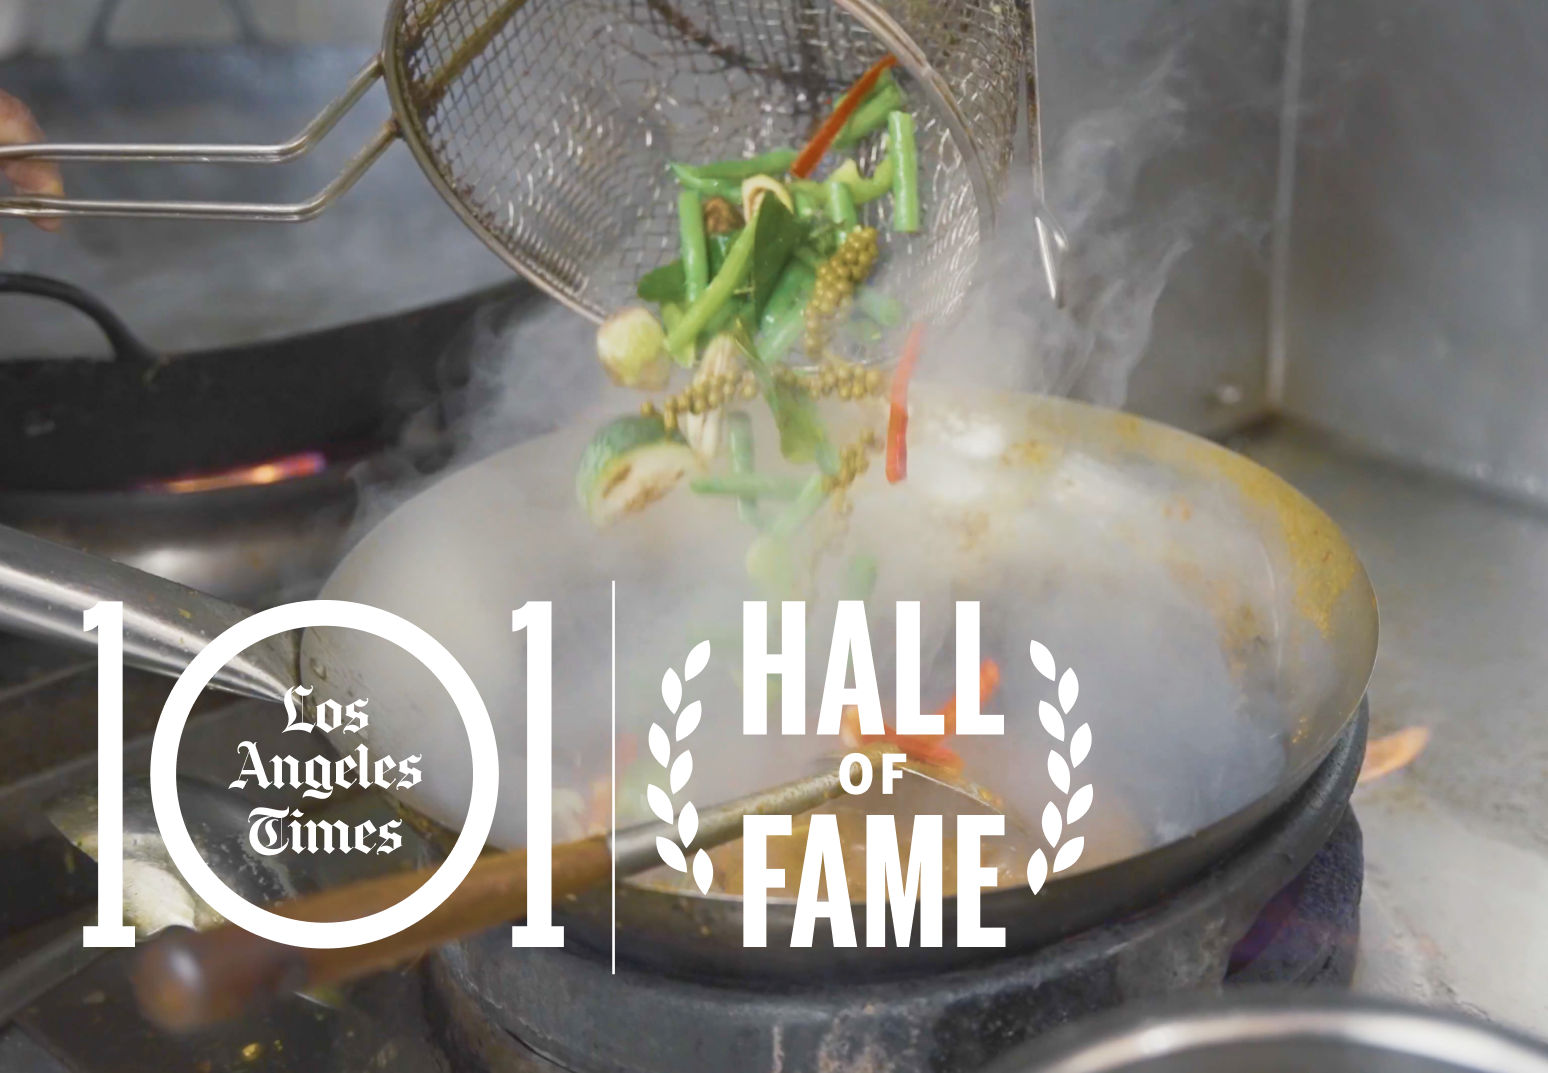 Grand Central Market Inducted into LA Times Best Restaurants Hall of